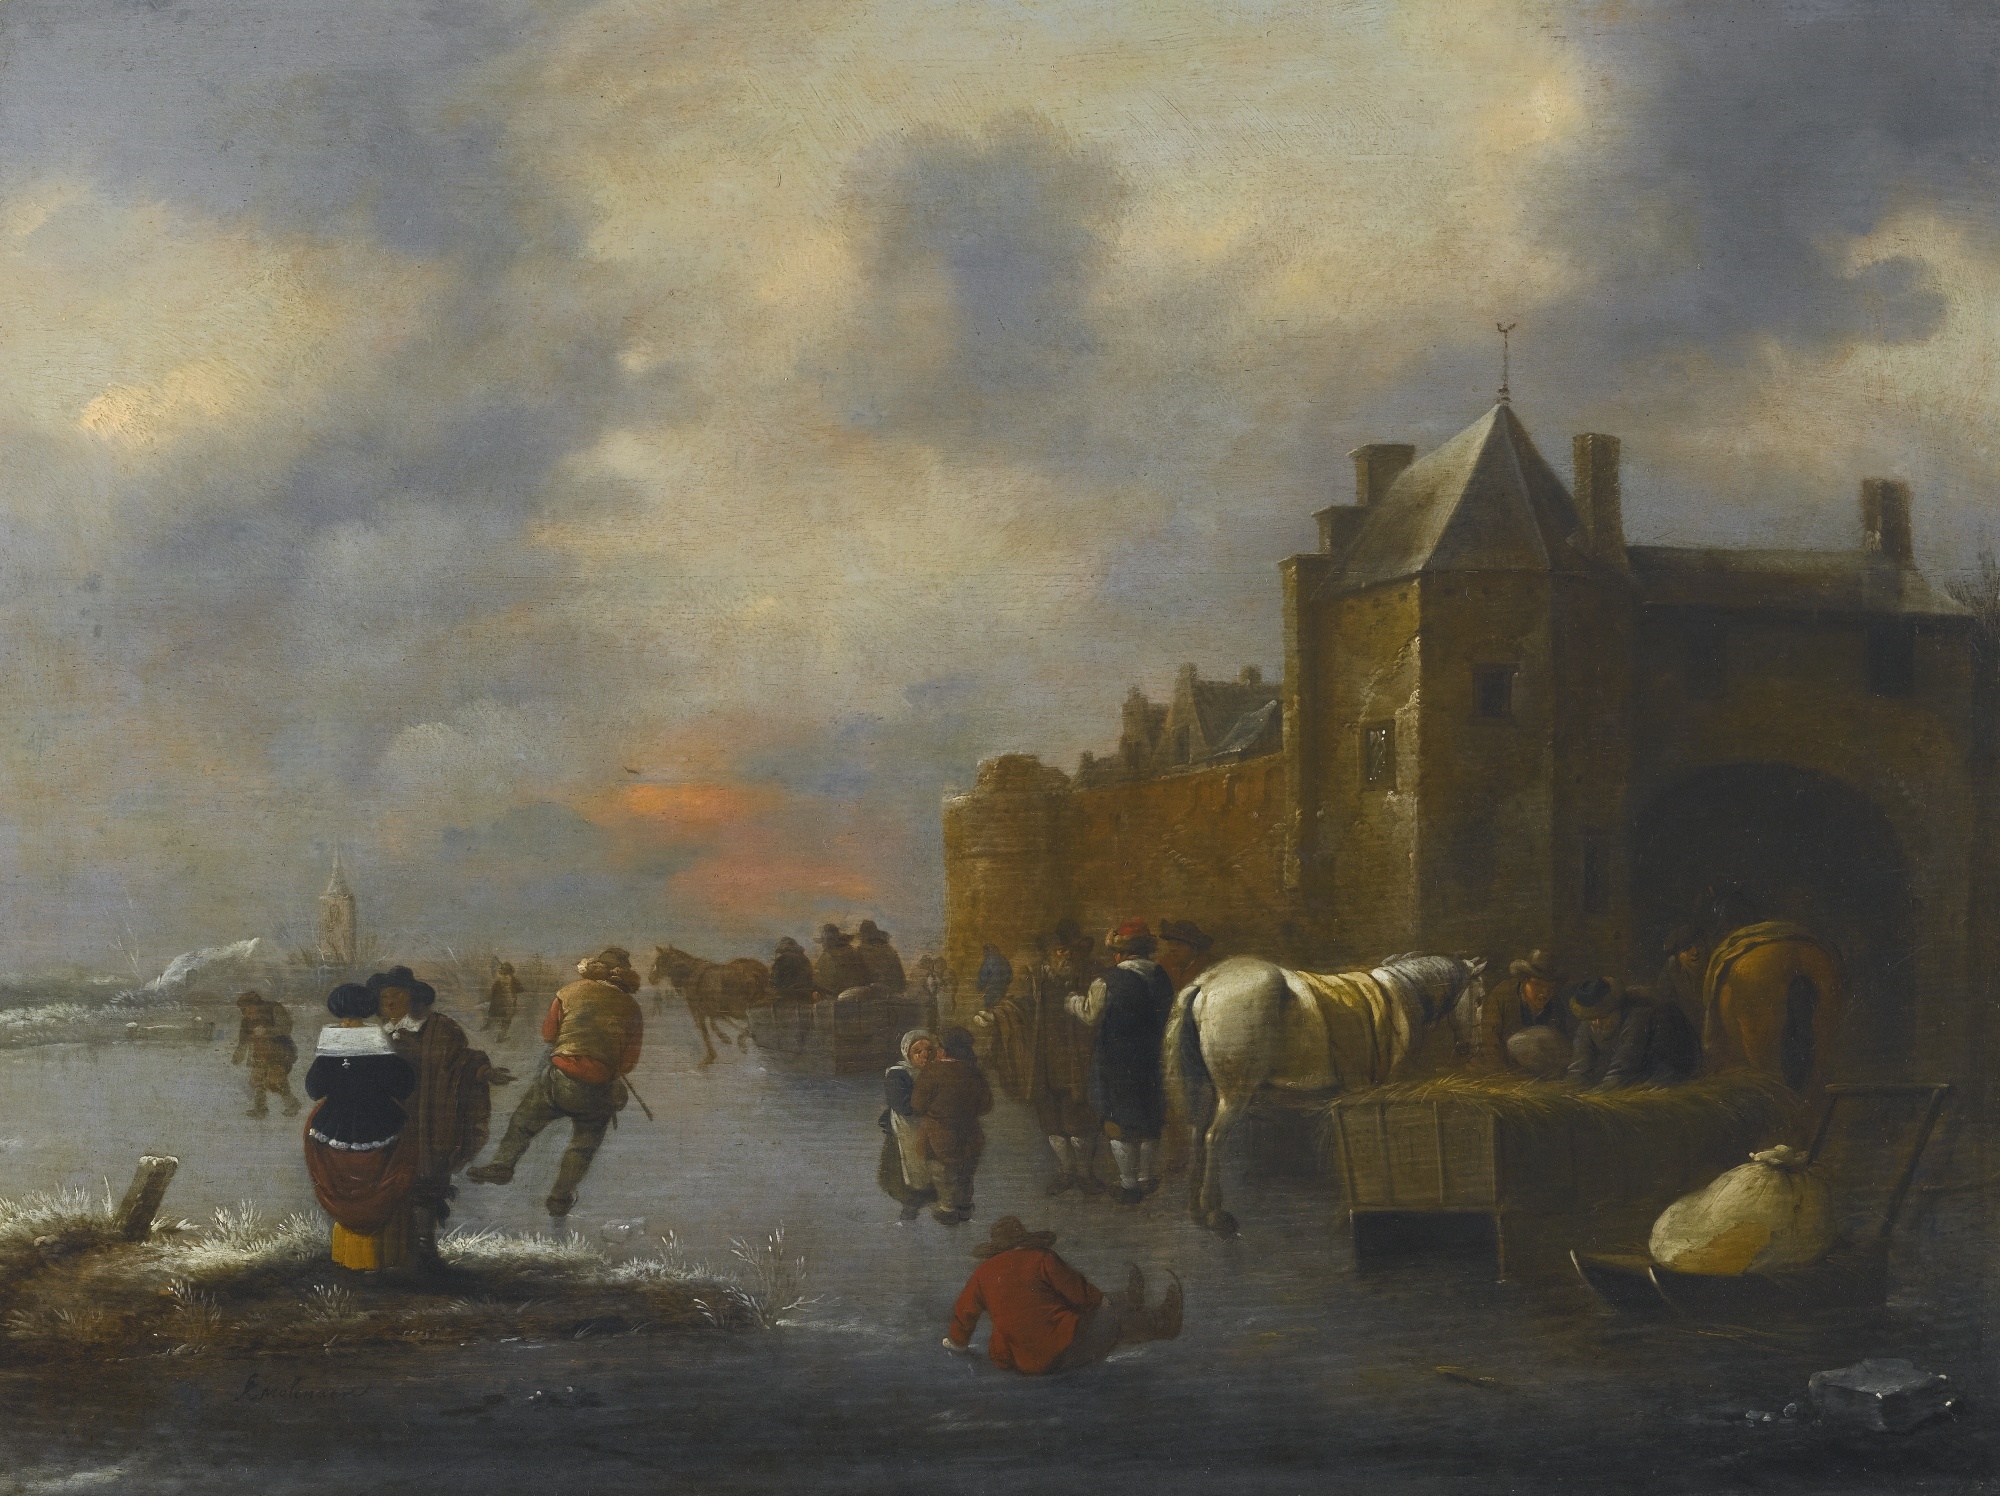 WINTER LANDSCAPE WITH SKATERS ON A RIVER NEAR A WALLED TOWN by Klaes Molenaer